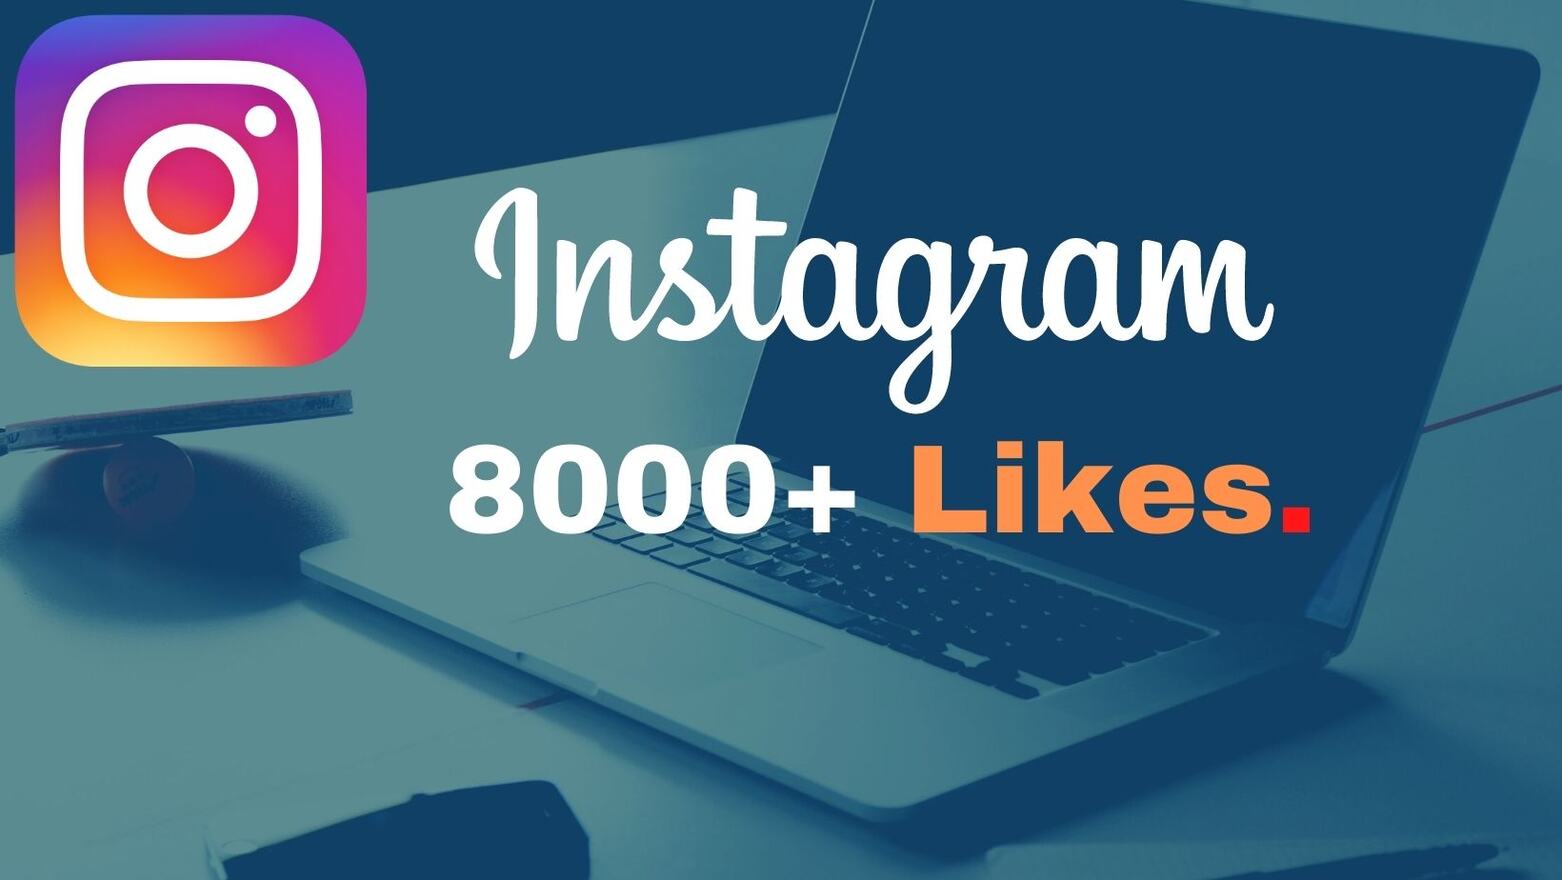 8000+ Instagram Likes Instant, lifetime guaranteed, Non-drop, and active user